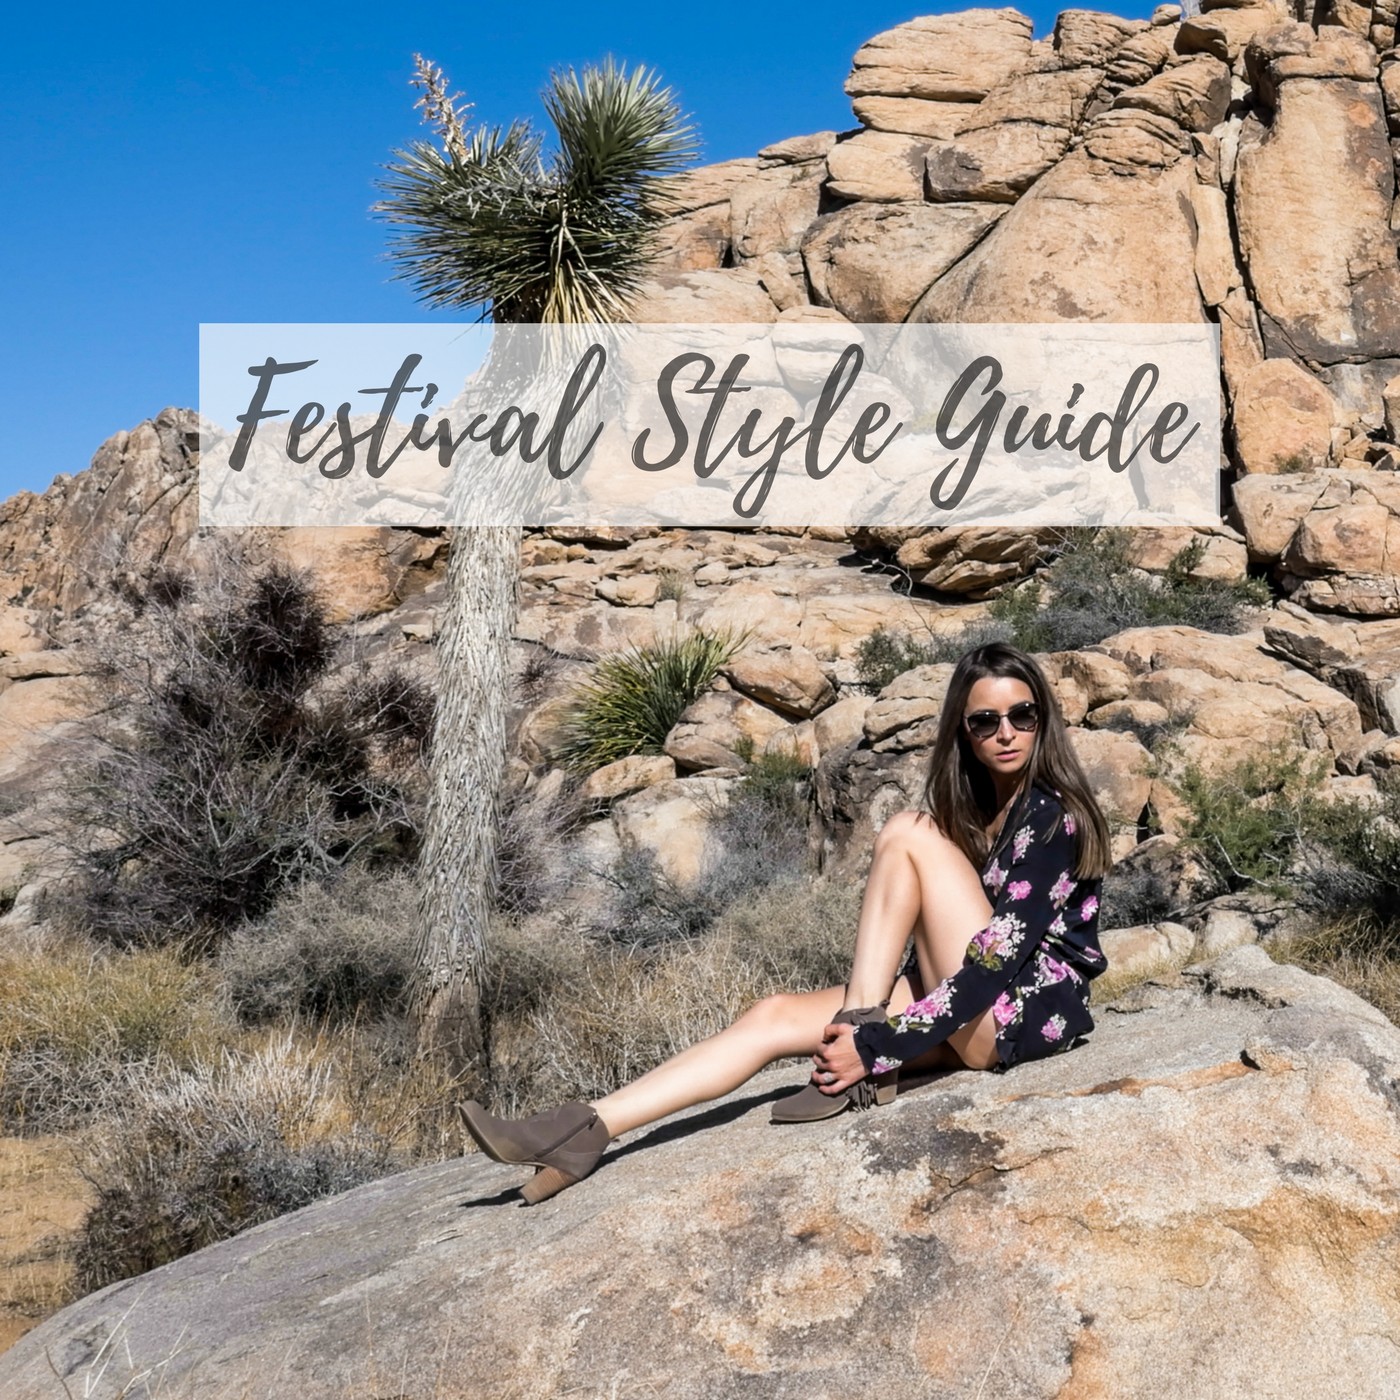 Best coachella outfits 2017 and what we're packing for Coachella 2017! Click to read more on modersvp.com